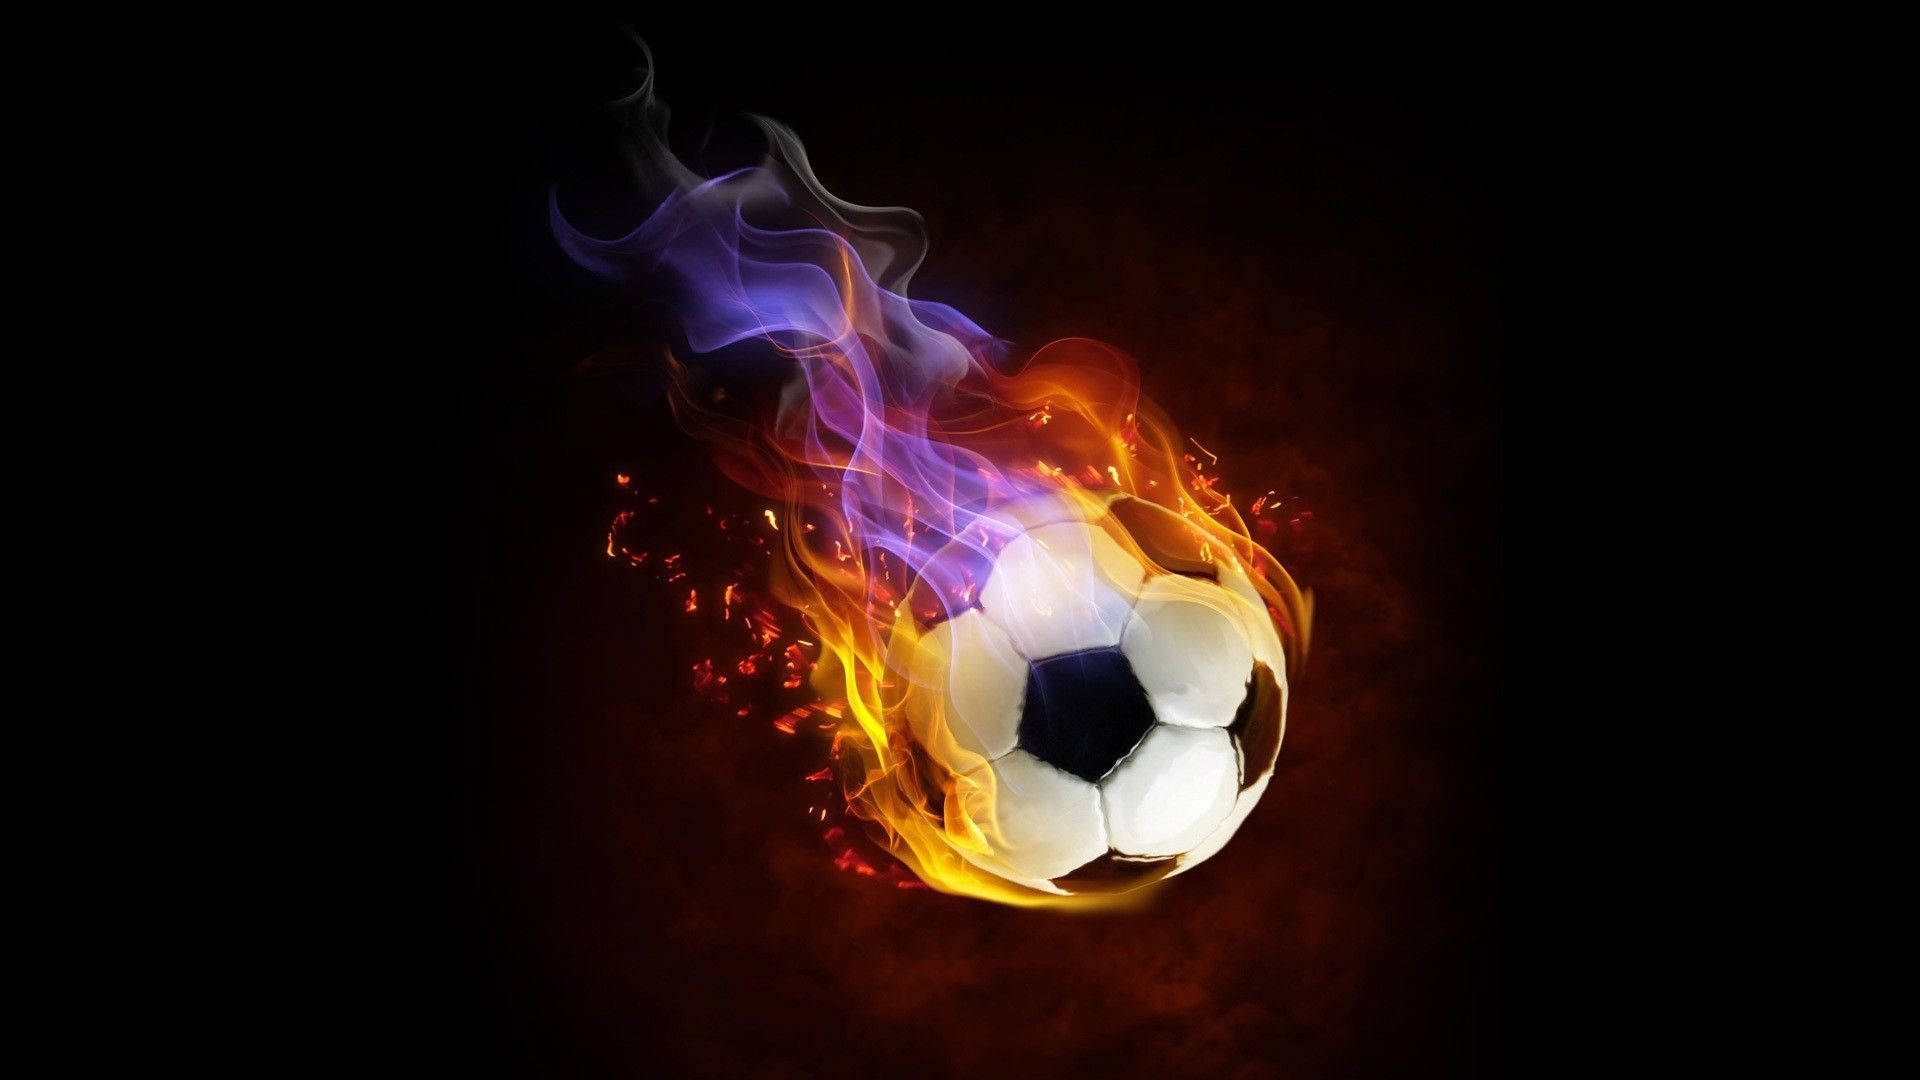 Cool Soccer Ball Flames Background